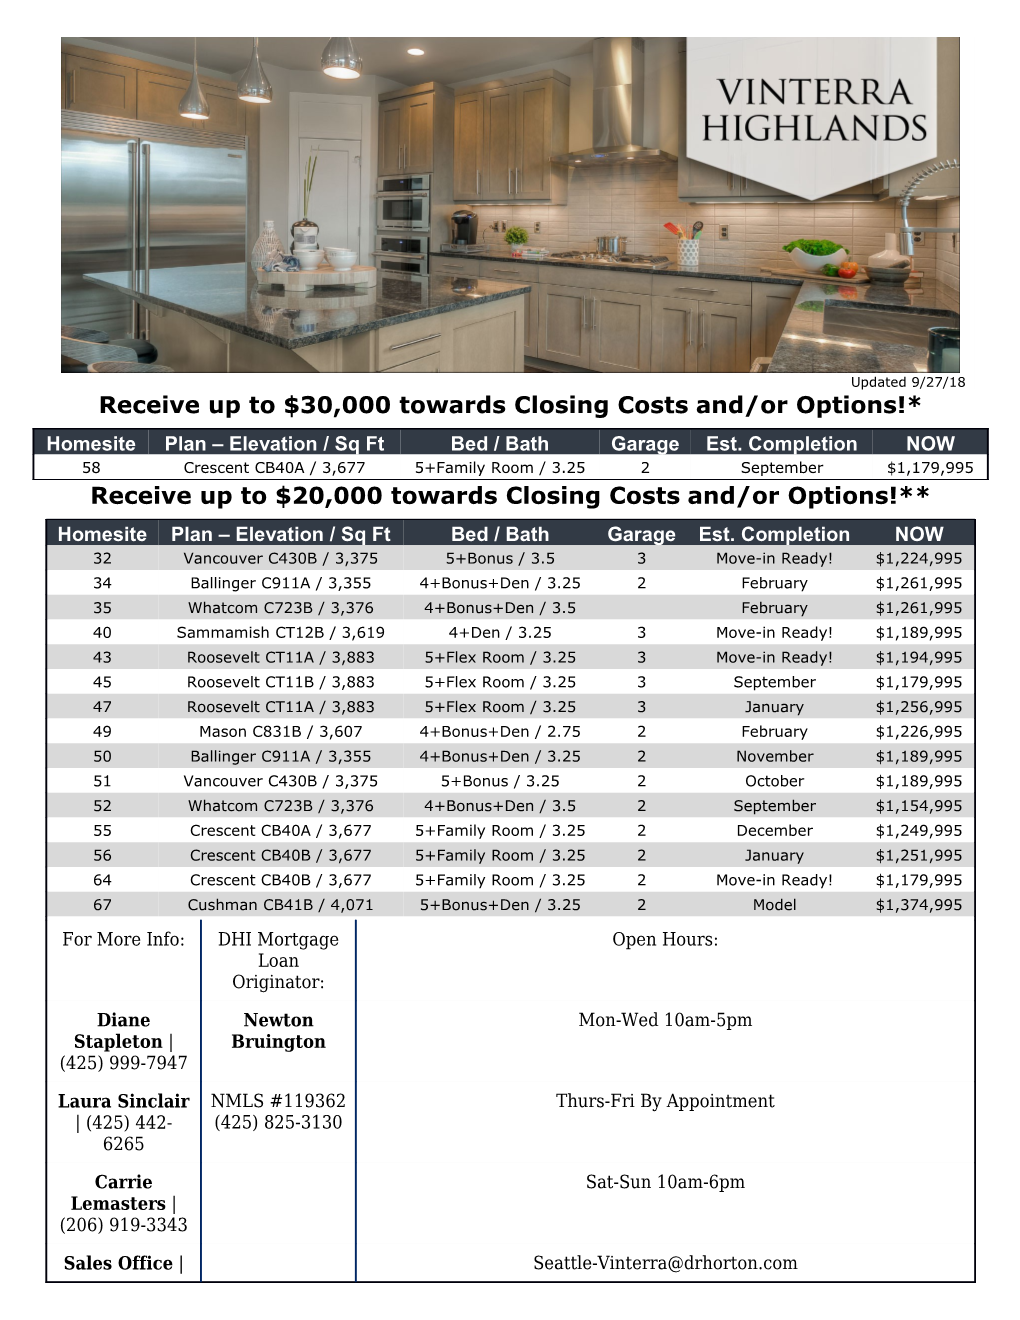 Receive up to $30,000 Towards Closing Costsand/Or Options!*